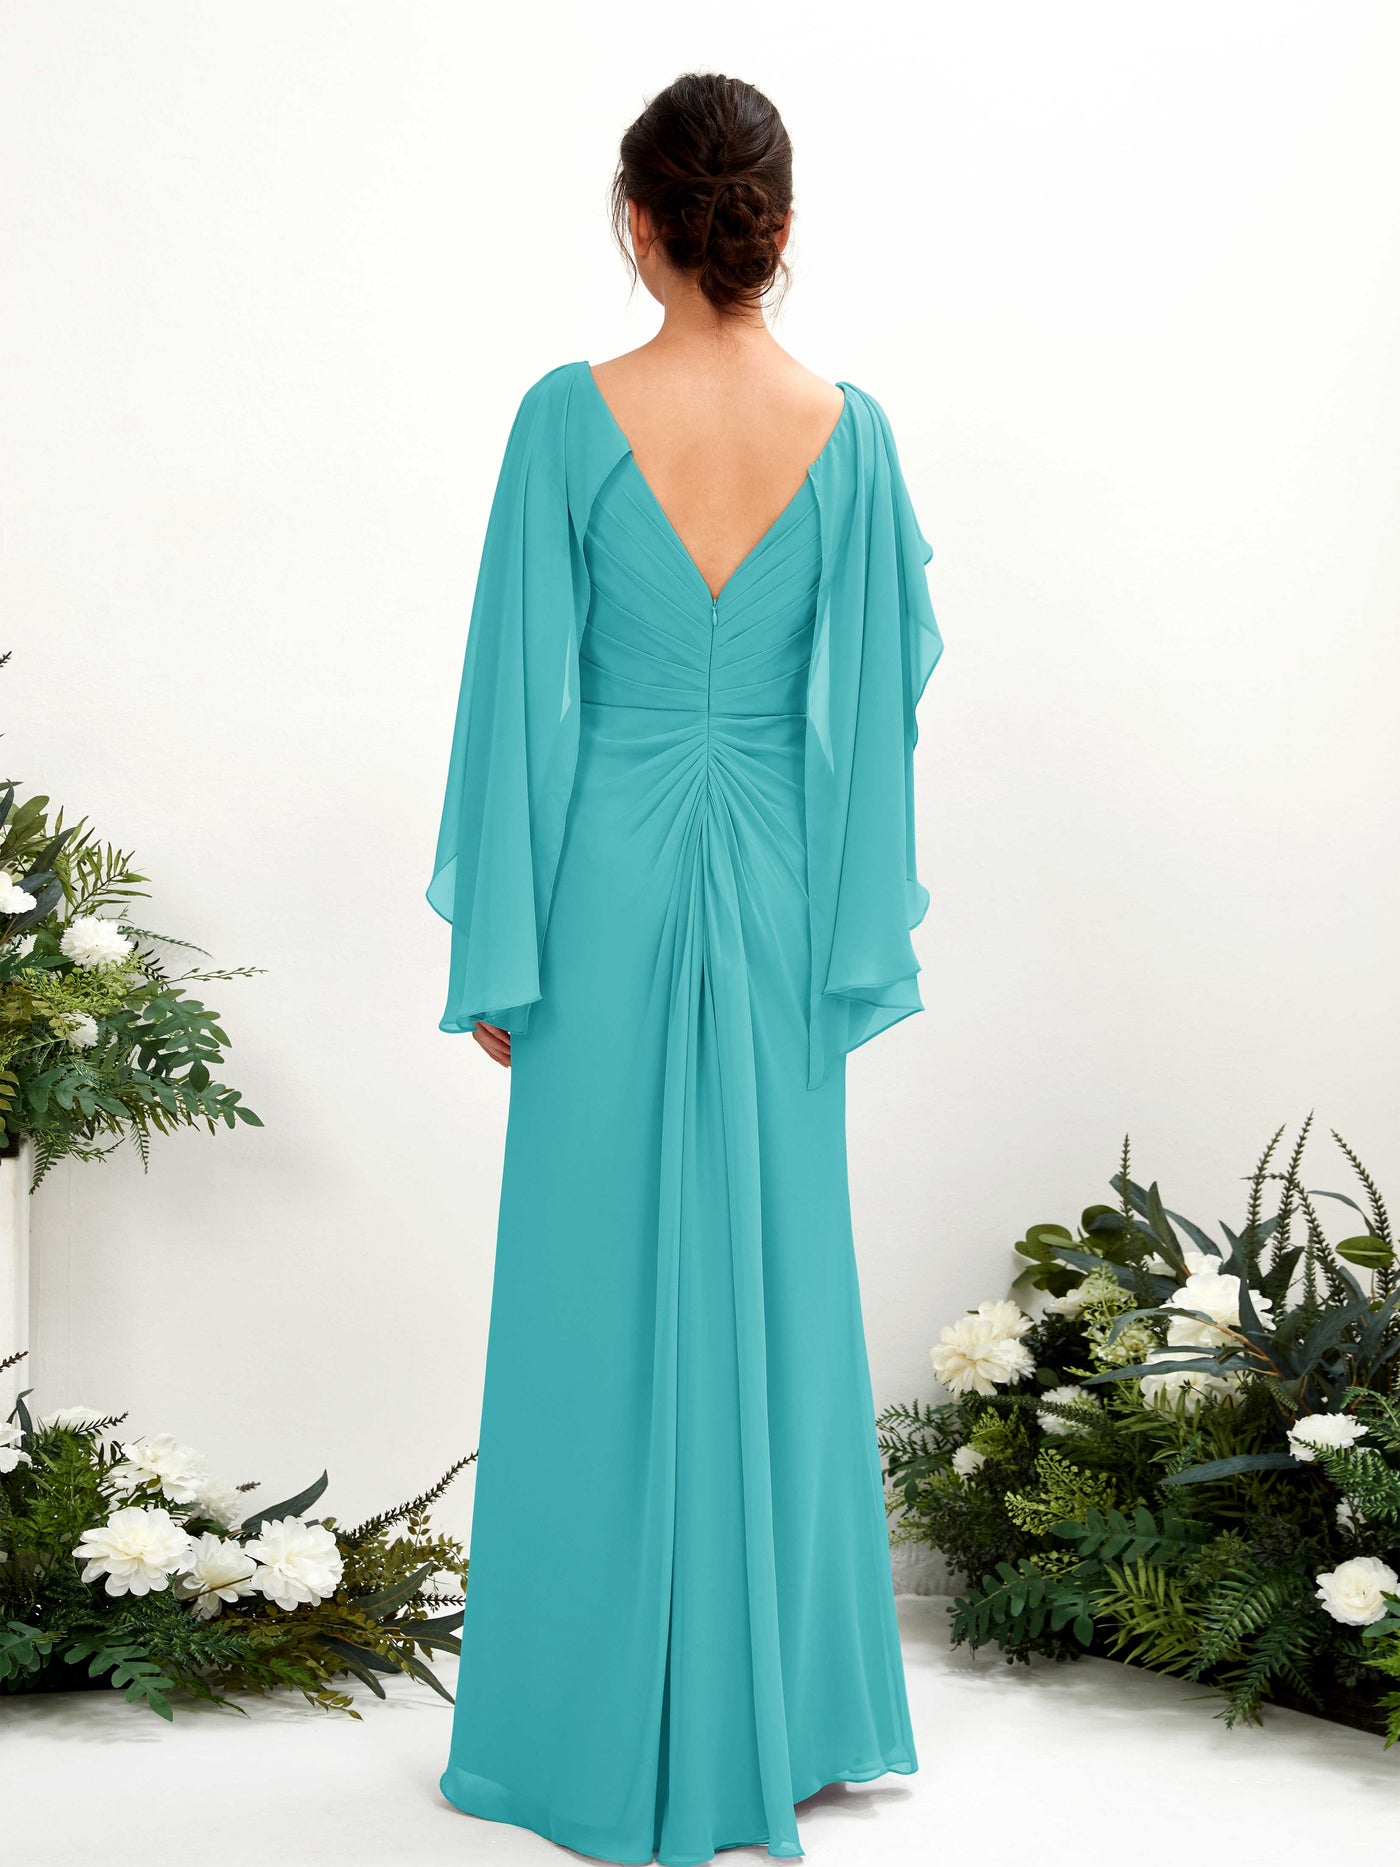 Turquoise Bridesmaid Dresses Bridesmaid Dress A-line Chiffon Straps Full Length Long Sleeves Wedding Party Dress (80220123)#color_turquoise